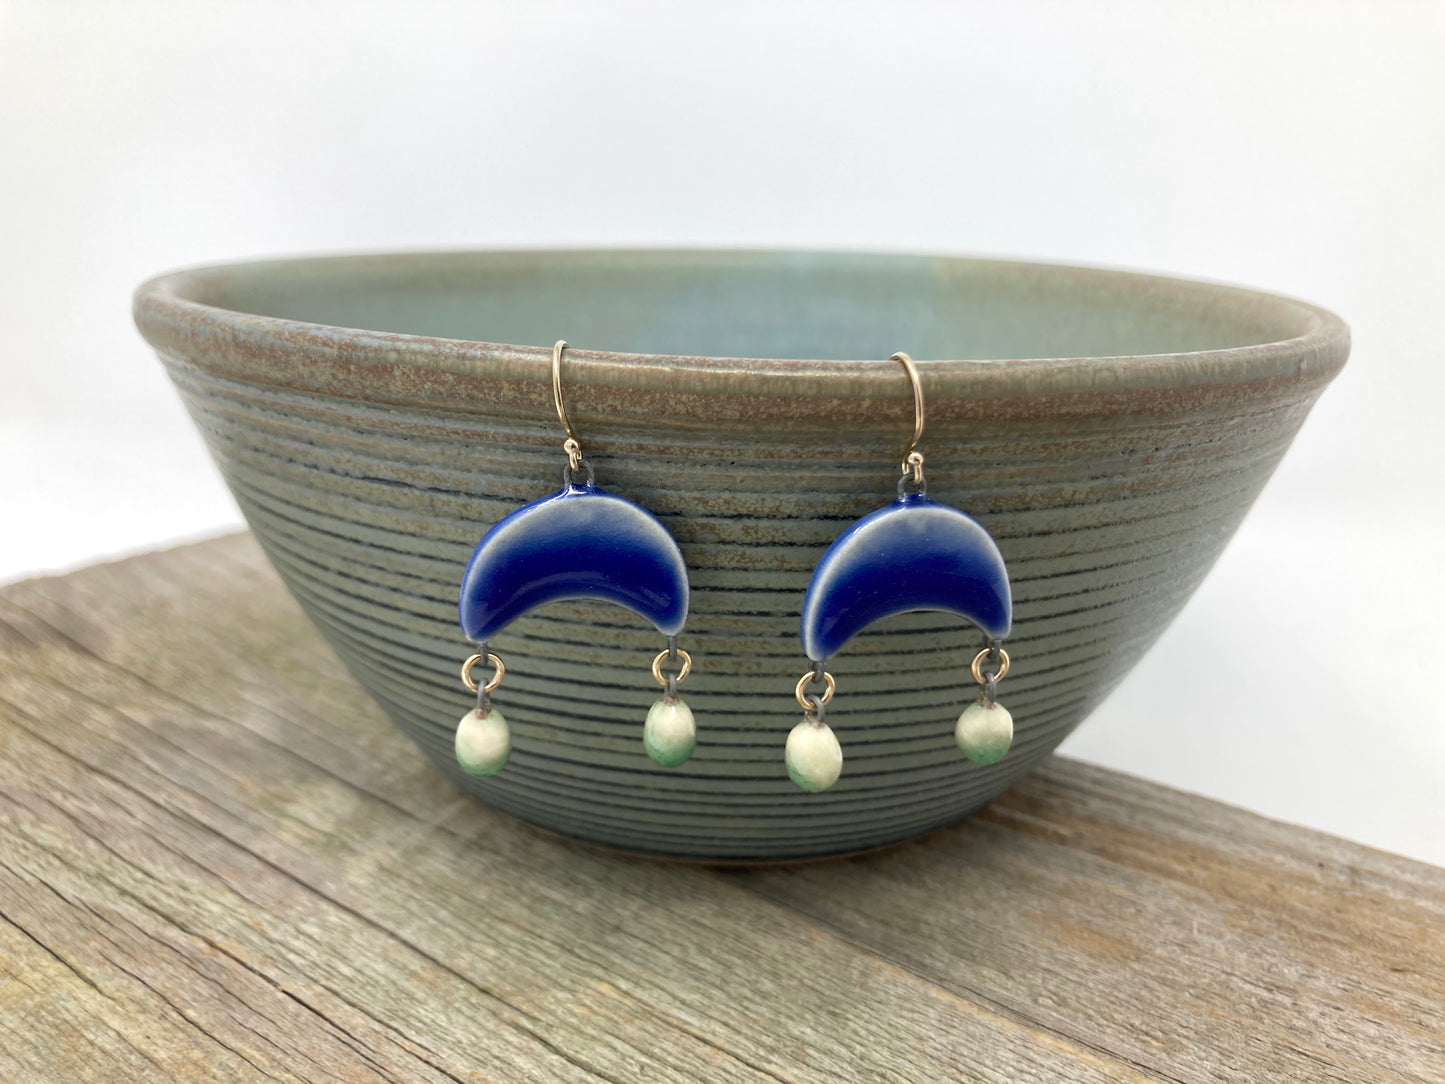 Small Cobalt Arch Earrings with Green Dangles